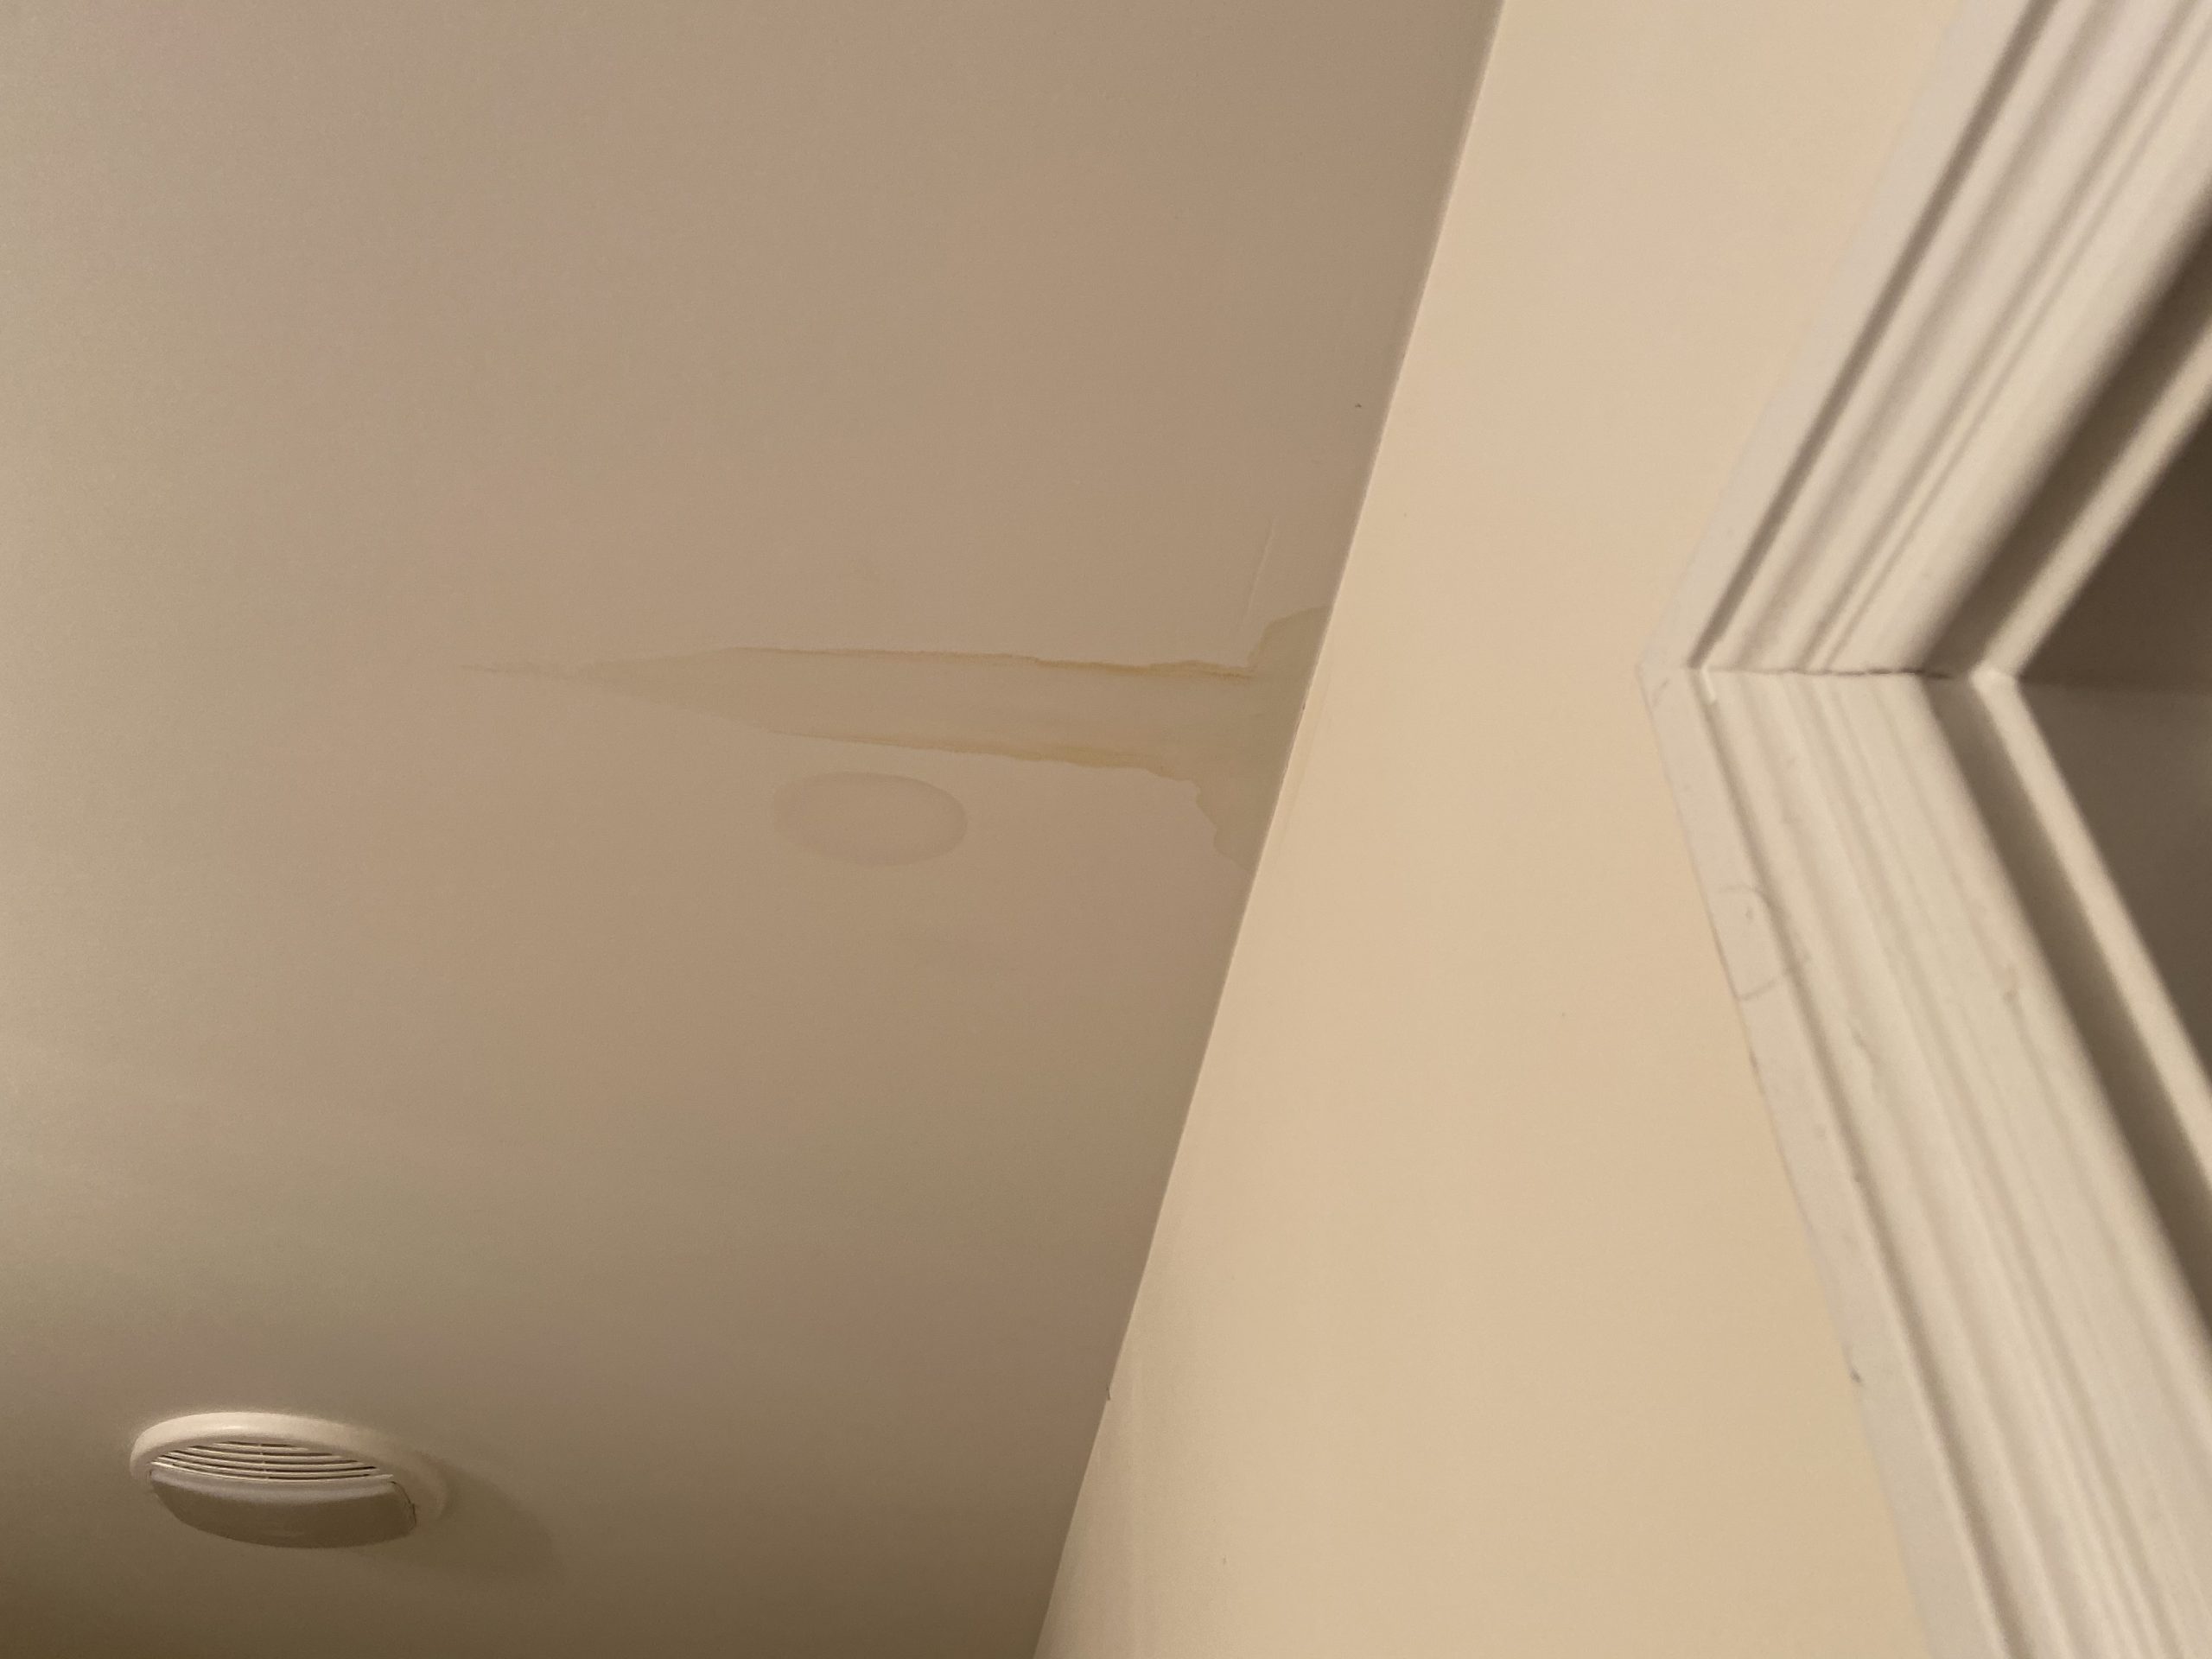 this is a ceiling stain that was caused by the leaking pipe boot